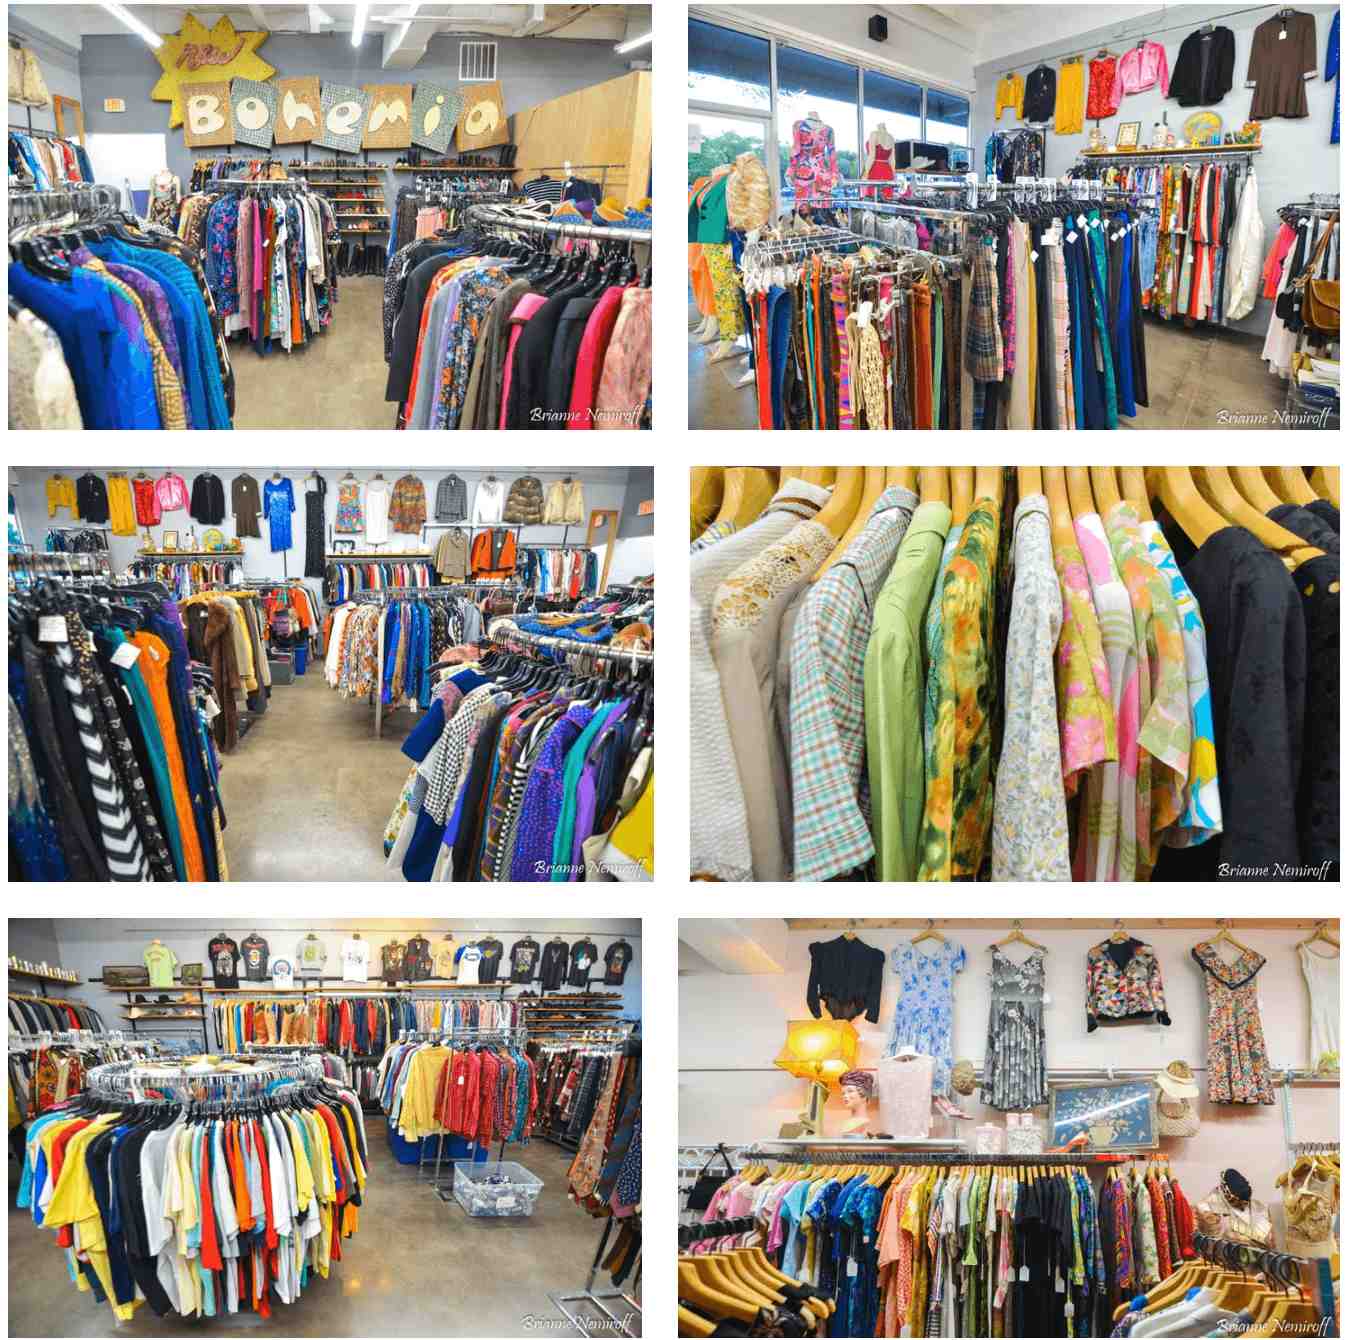 10 Best Vintage Clothing Stores in Austin Texas - New Bohemia